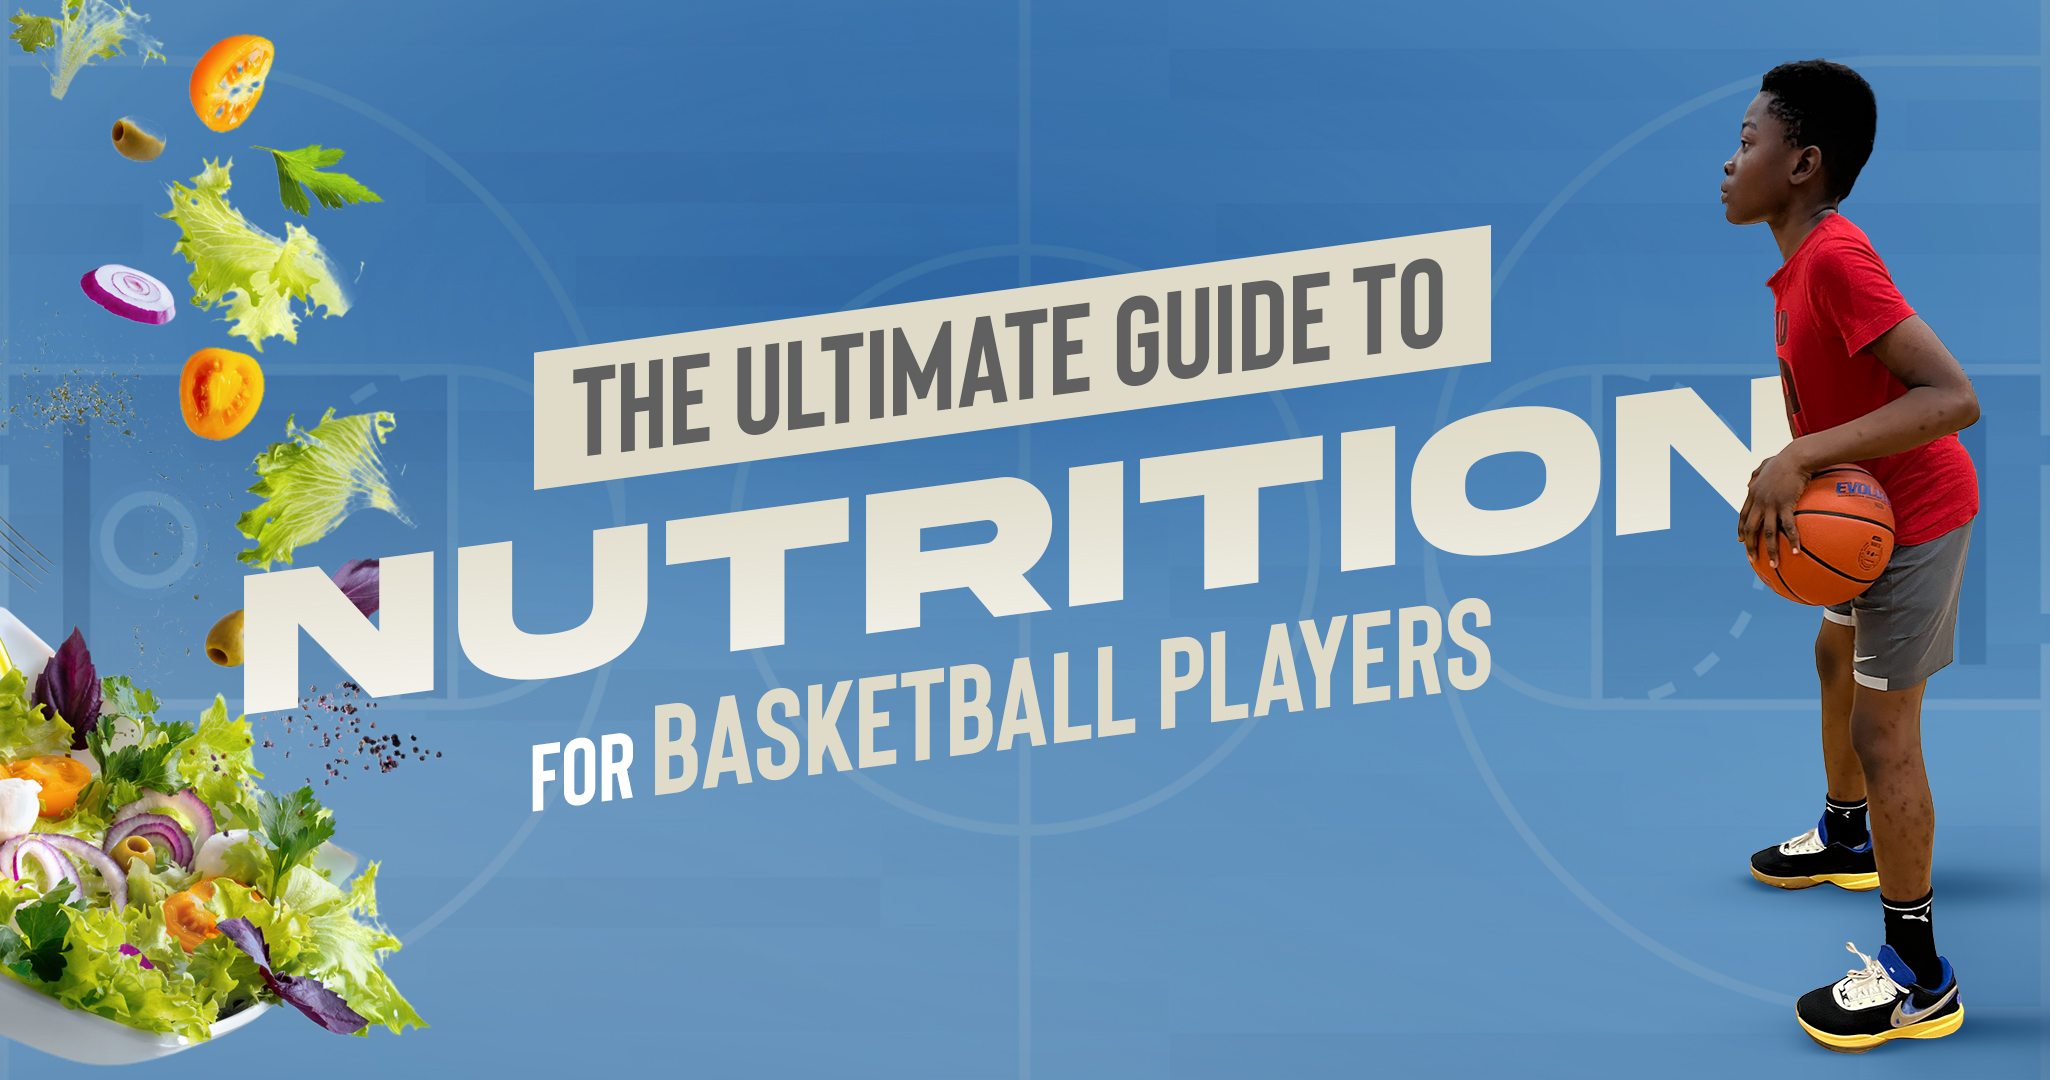 The Ultimate Guide to Nutrition for Basketball Players